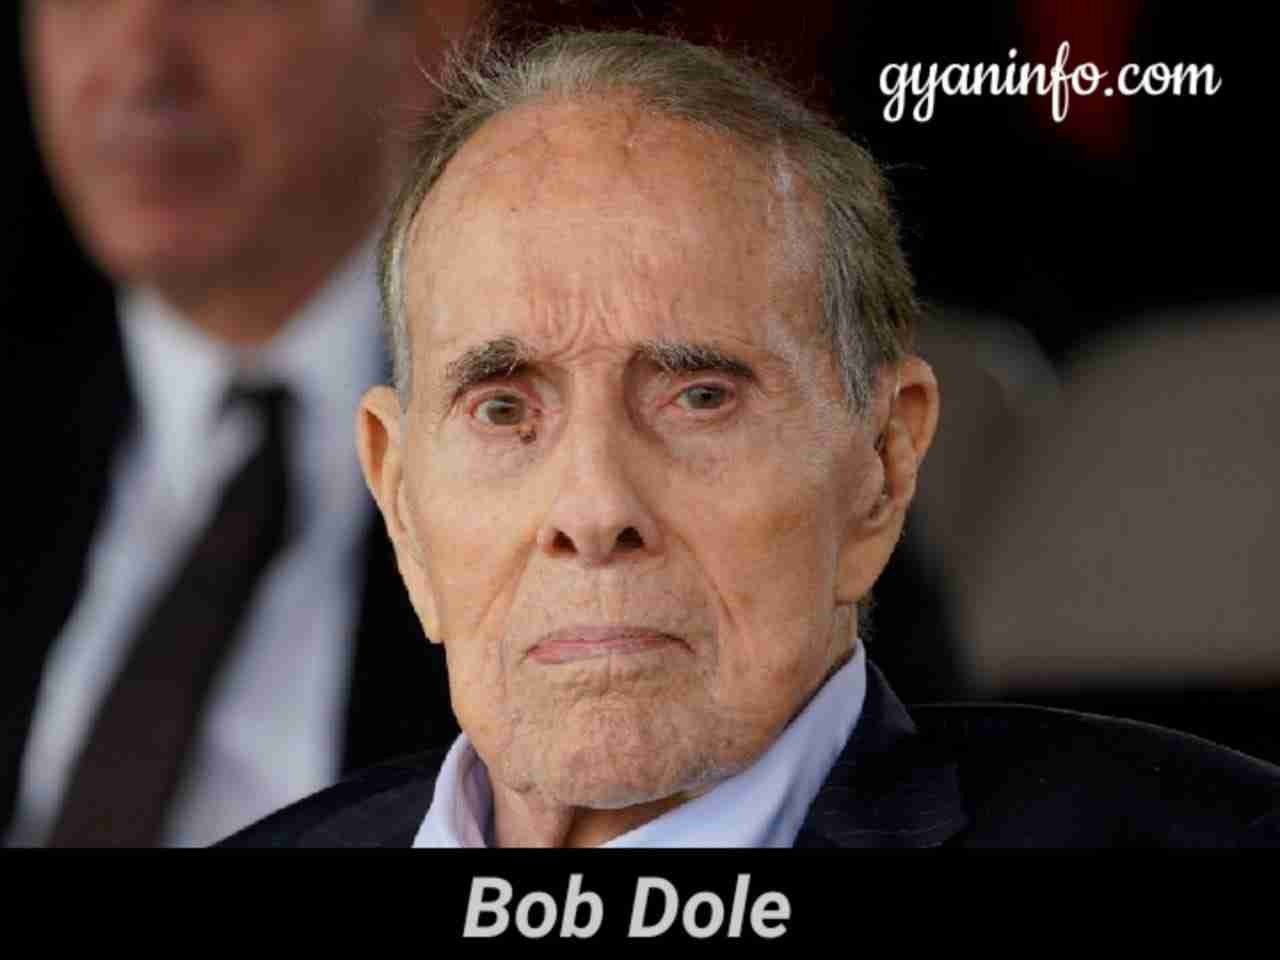 Bob Dole Biography, Death, Birthday, Age, Height, Wife, Net Worth & More